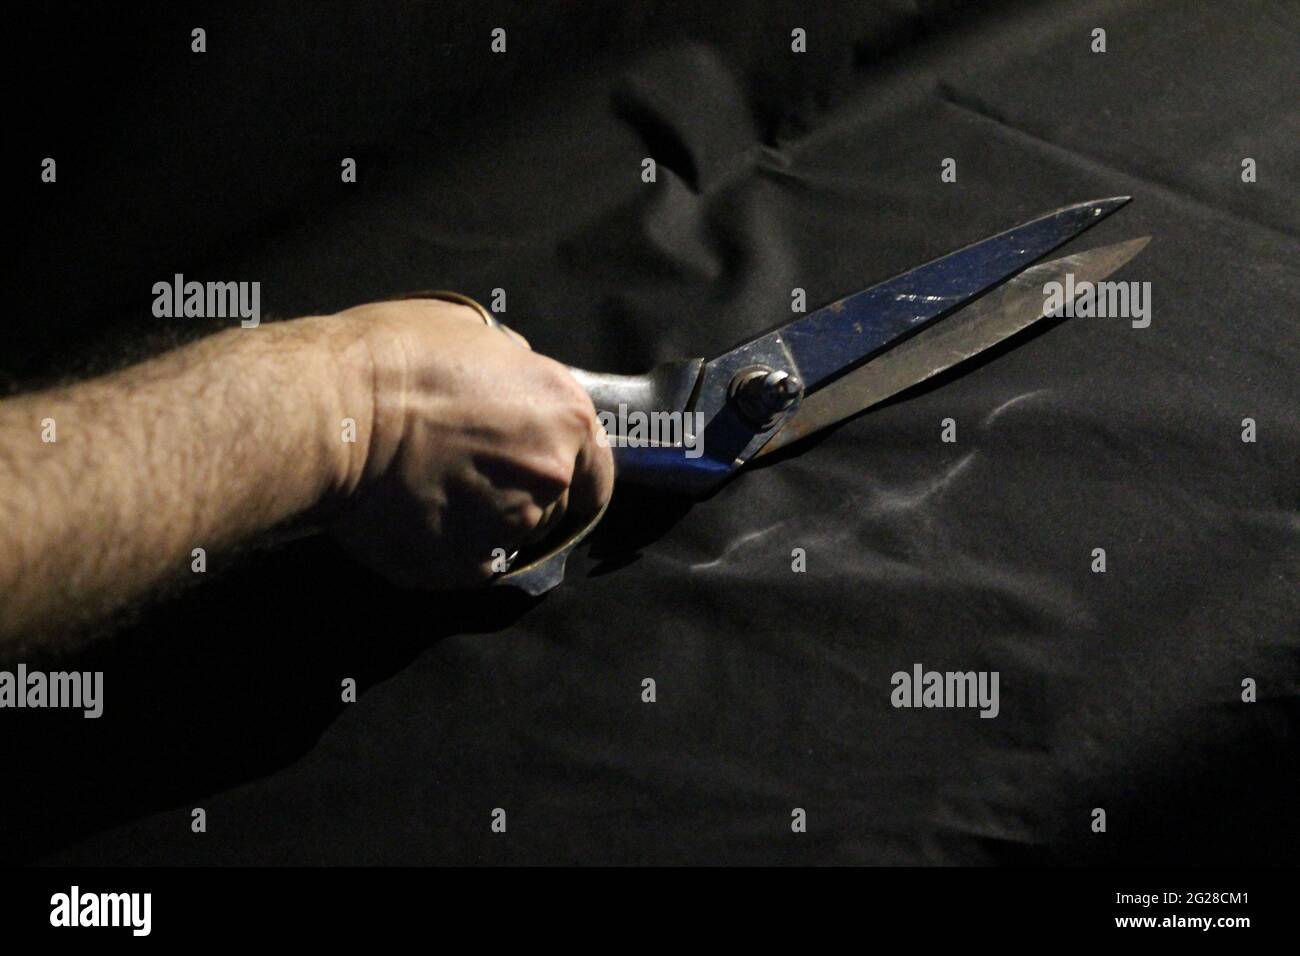 tailor's scissors and tape measure Stock Photo